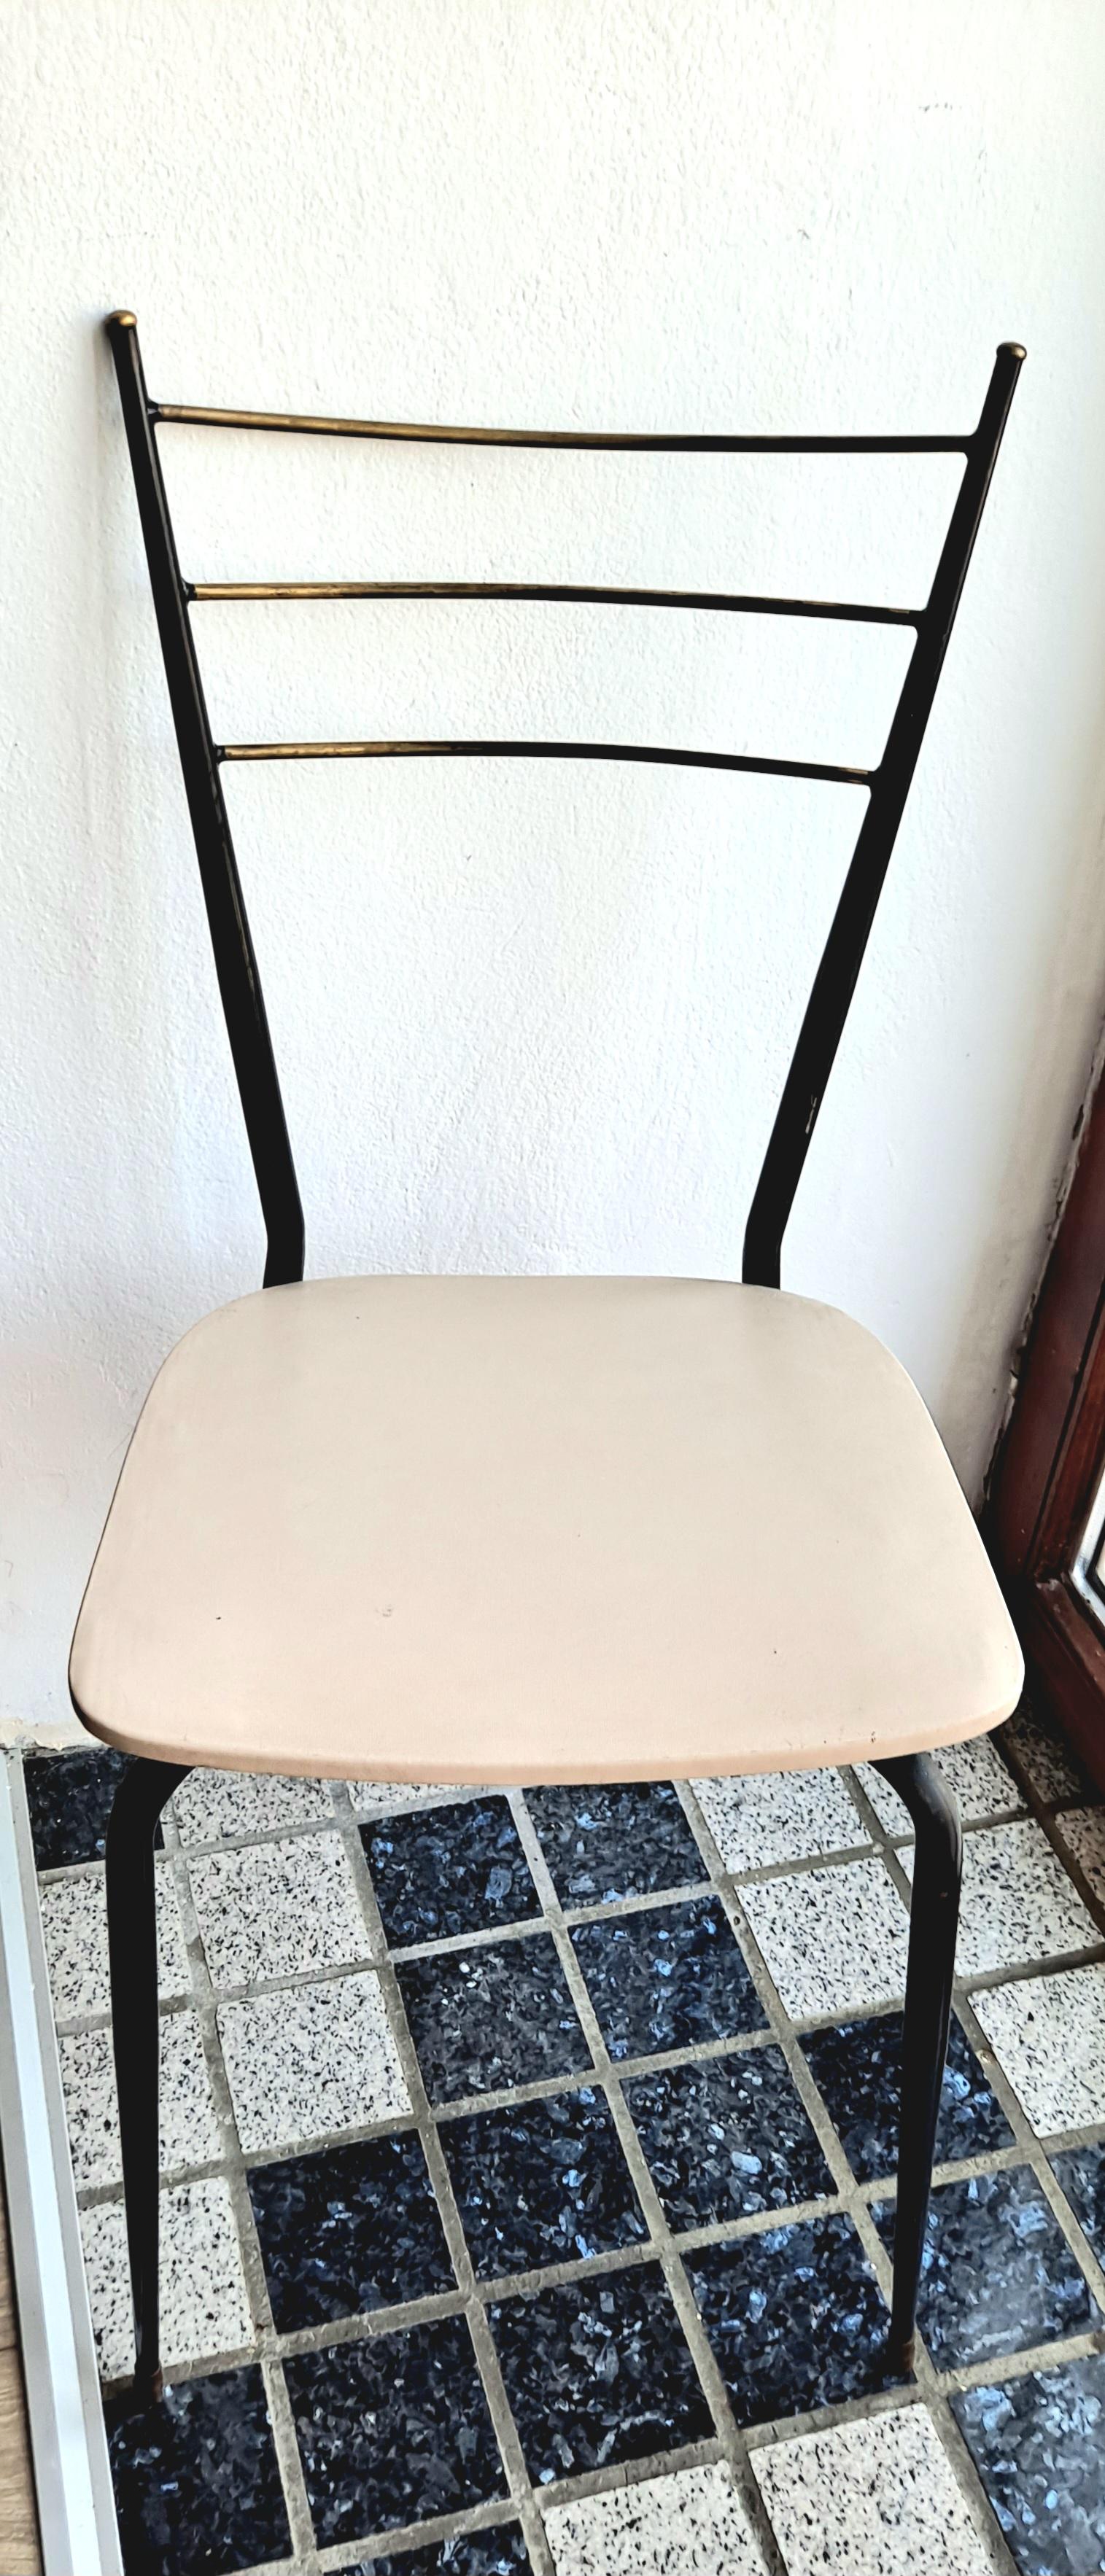  Italian Ding Room Chairs Attributed to Ico Parisi and Paolo di Poli  For Sale 4